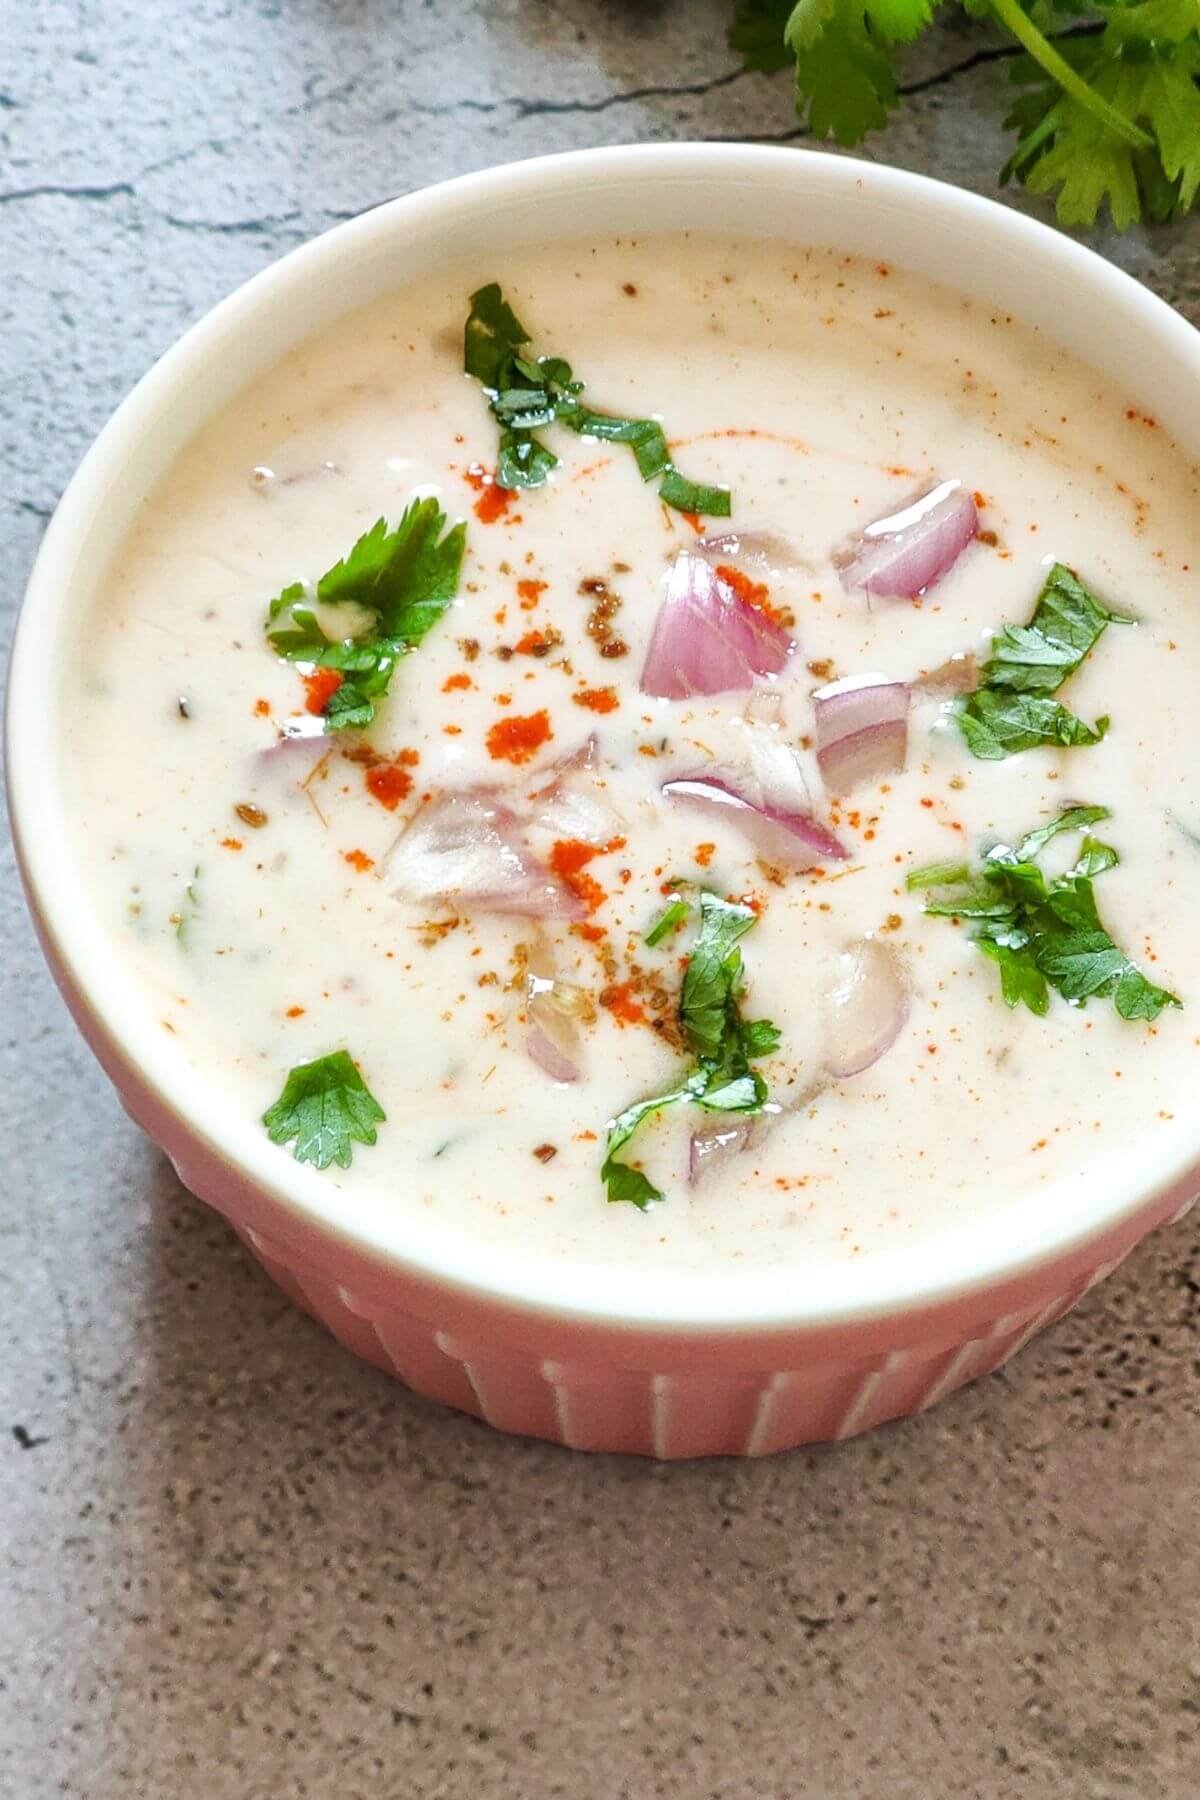 Red onion raita garnished with spices and herbs served in a bowl